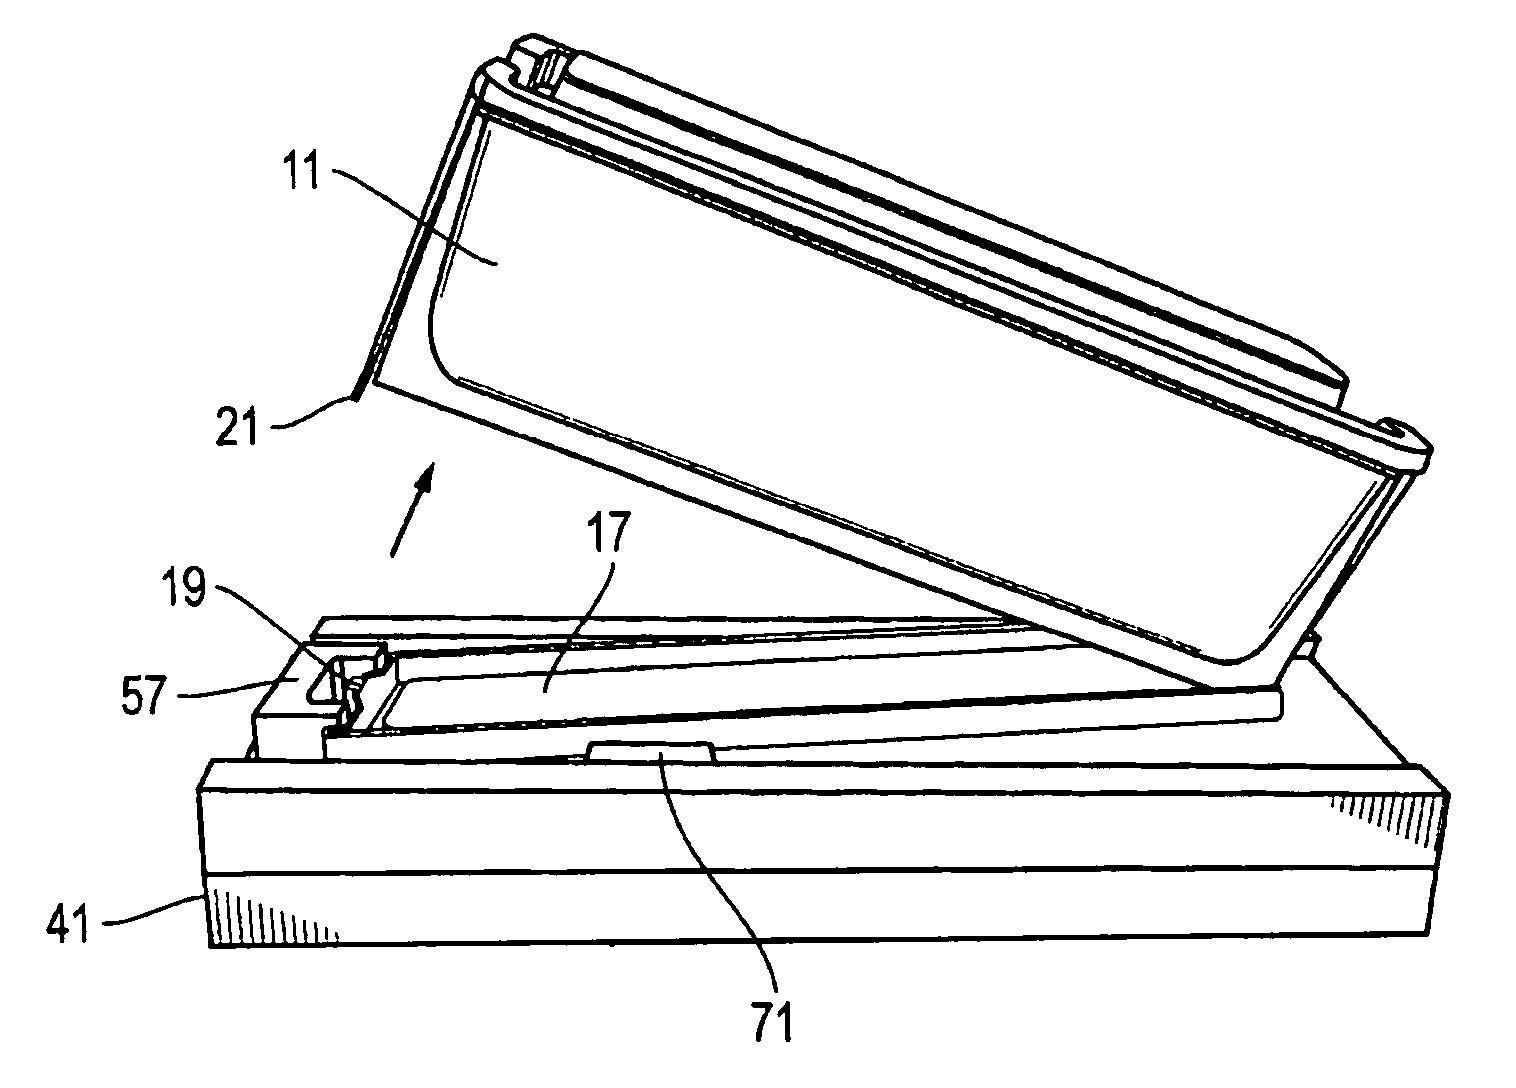 System, method, and apparatus for removing covers from shipping containers